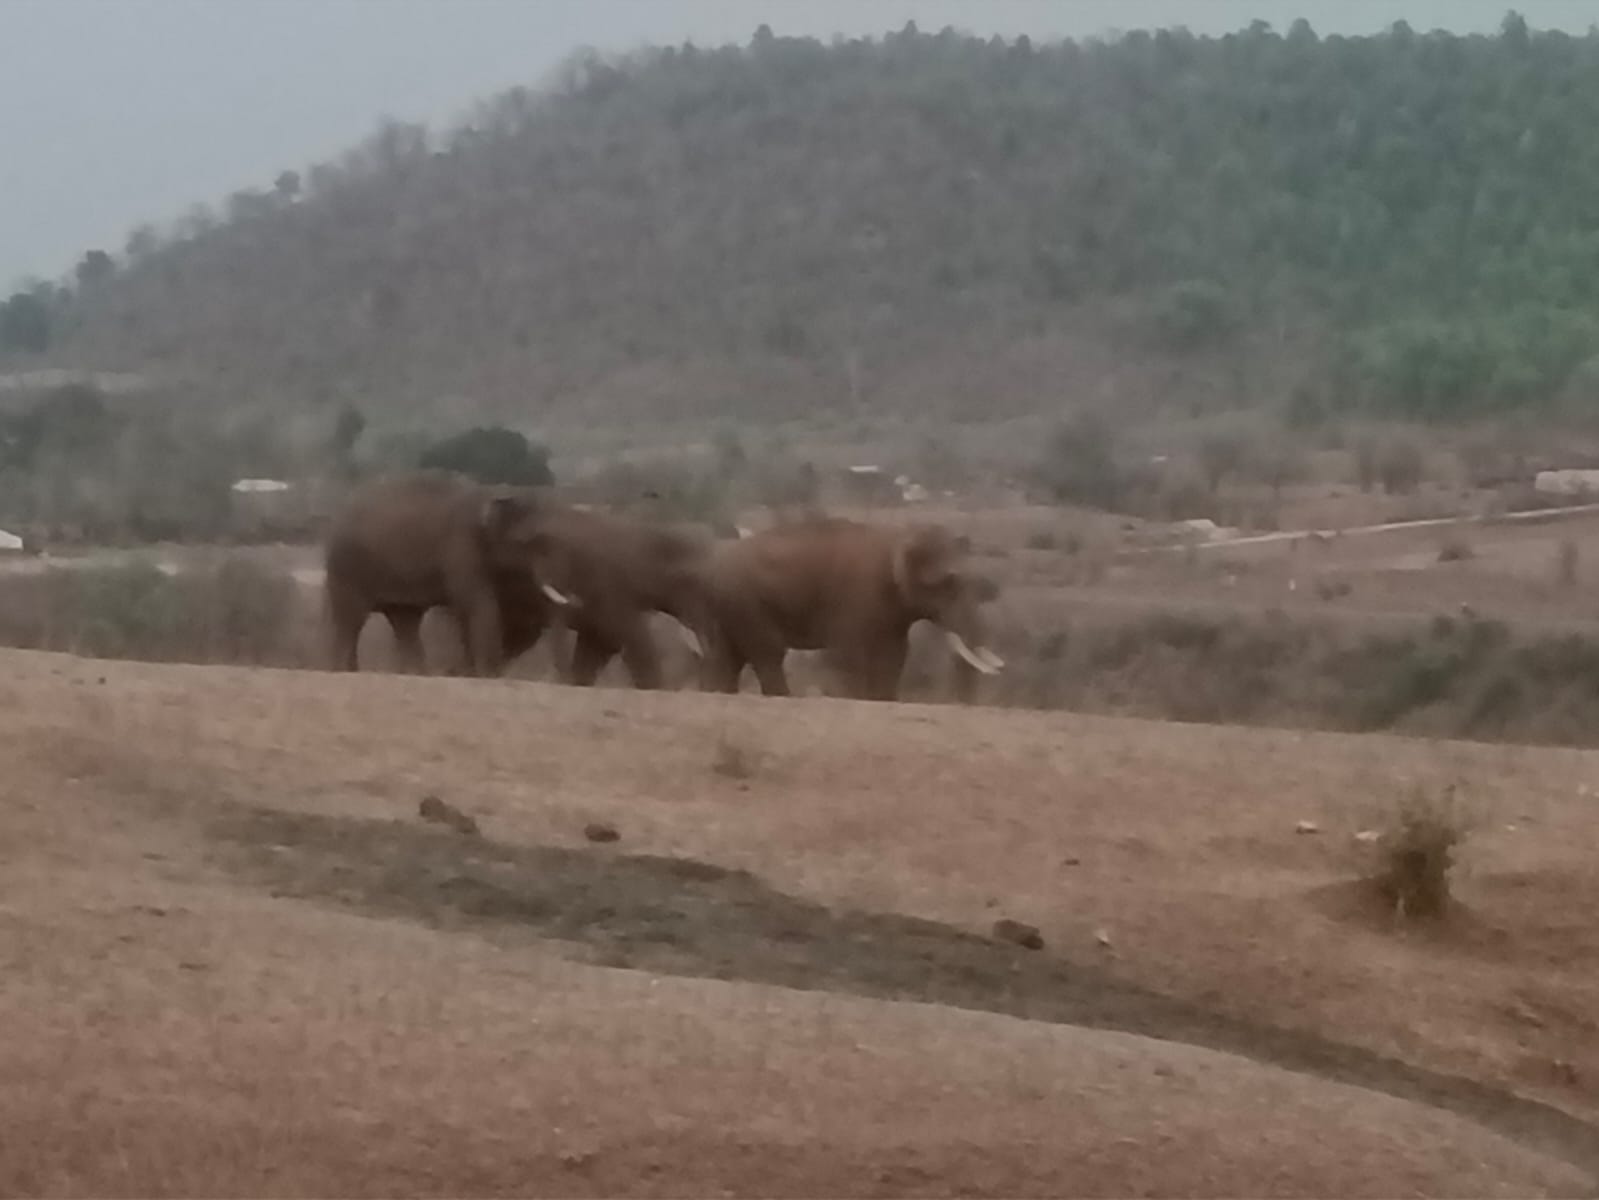 After spending 27 days in the forest here, a herd of elephants is retu